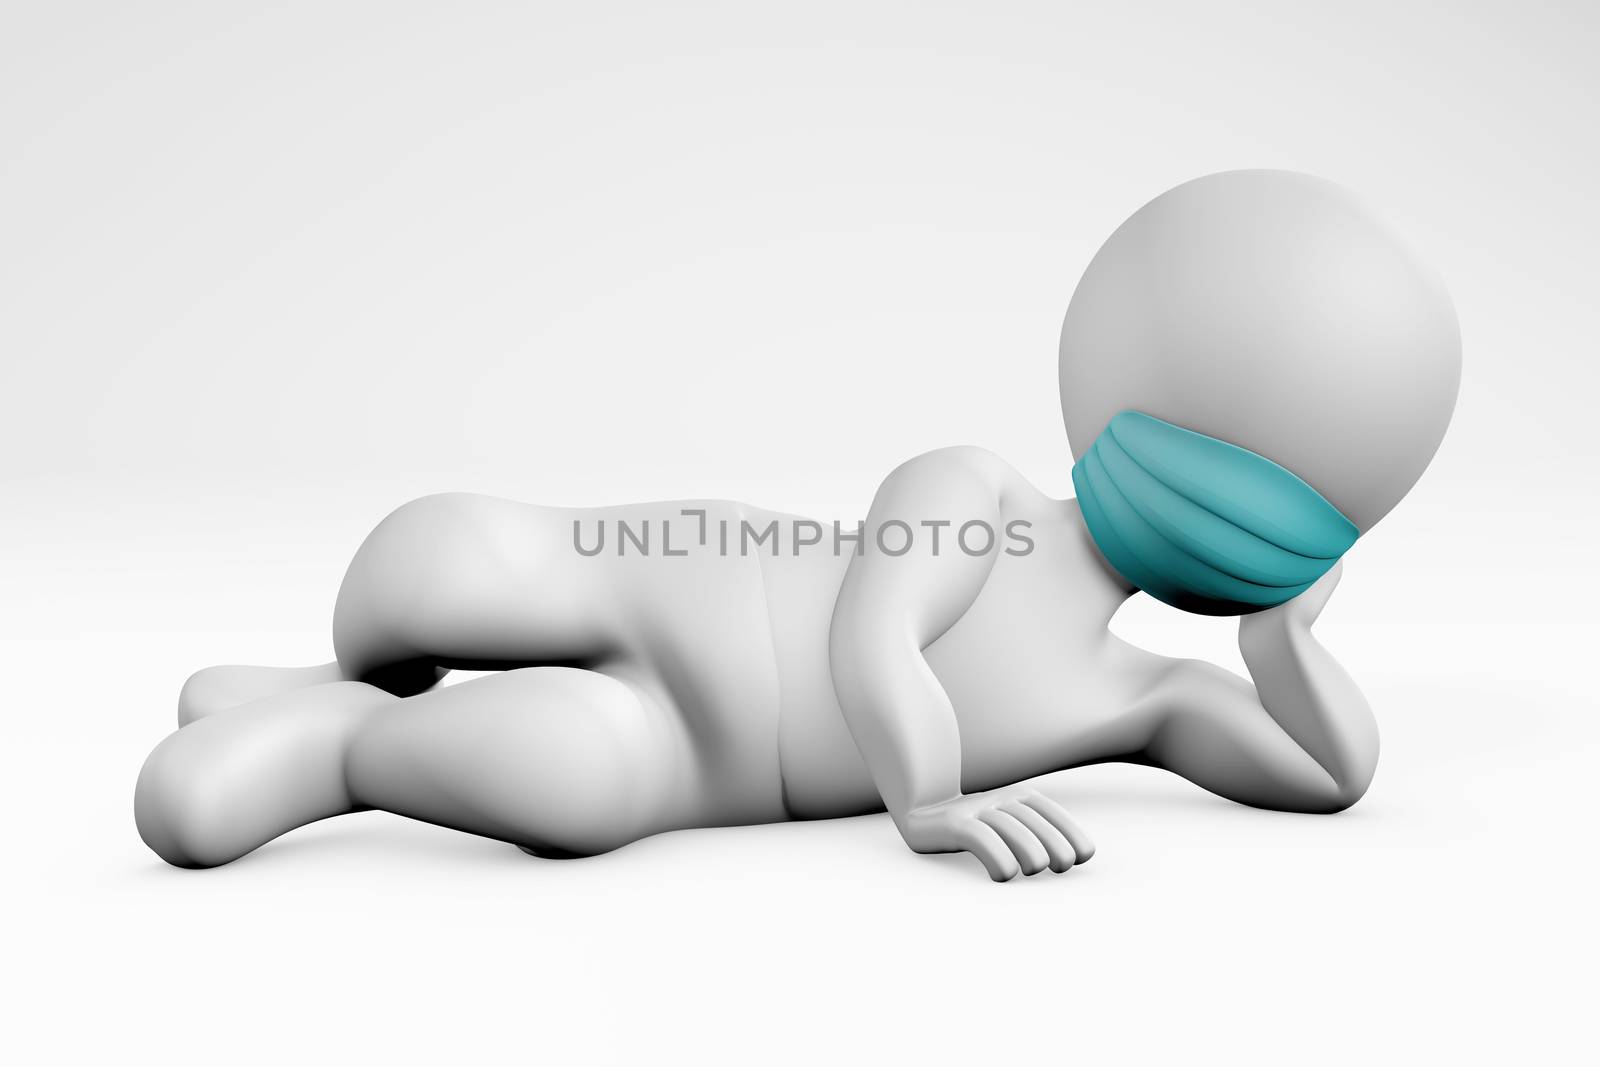 Man with mask lying on the floor 3d rendering by F1b0nacci